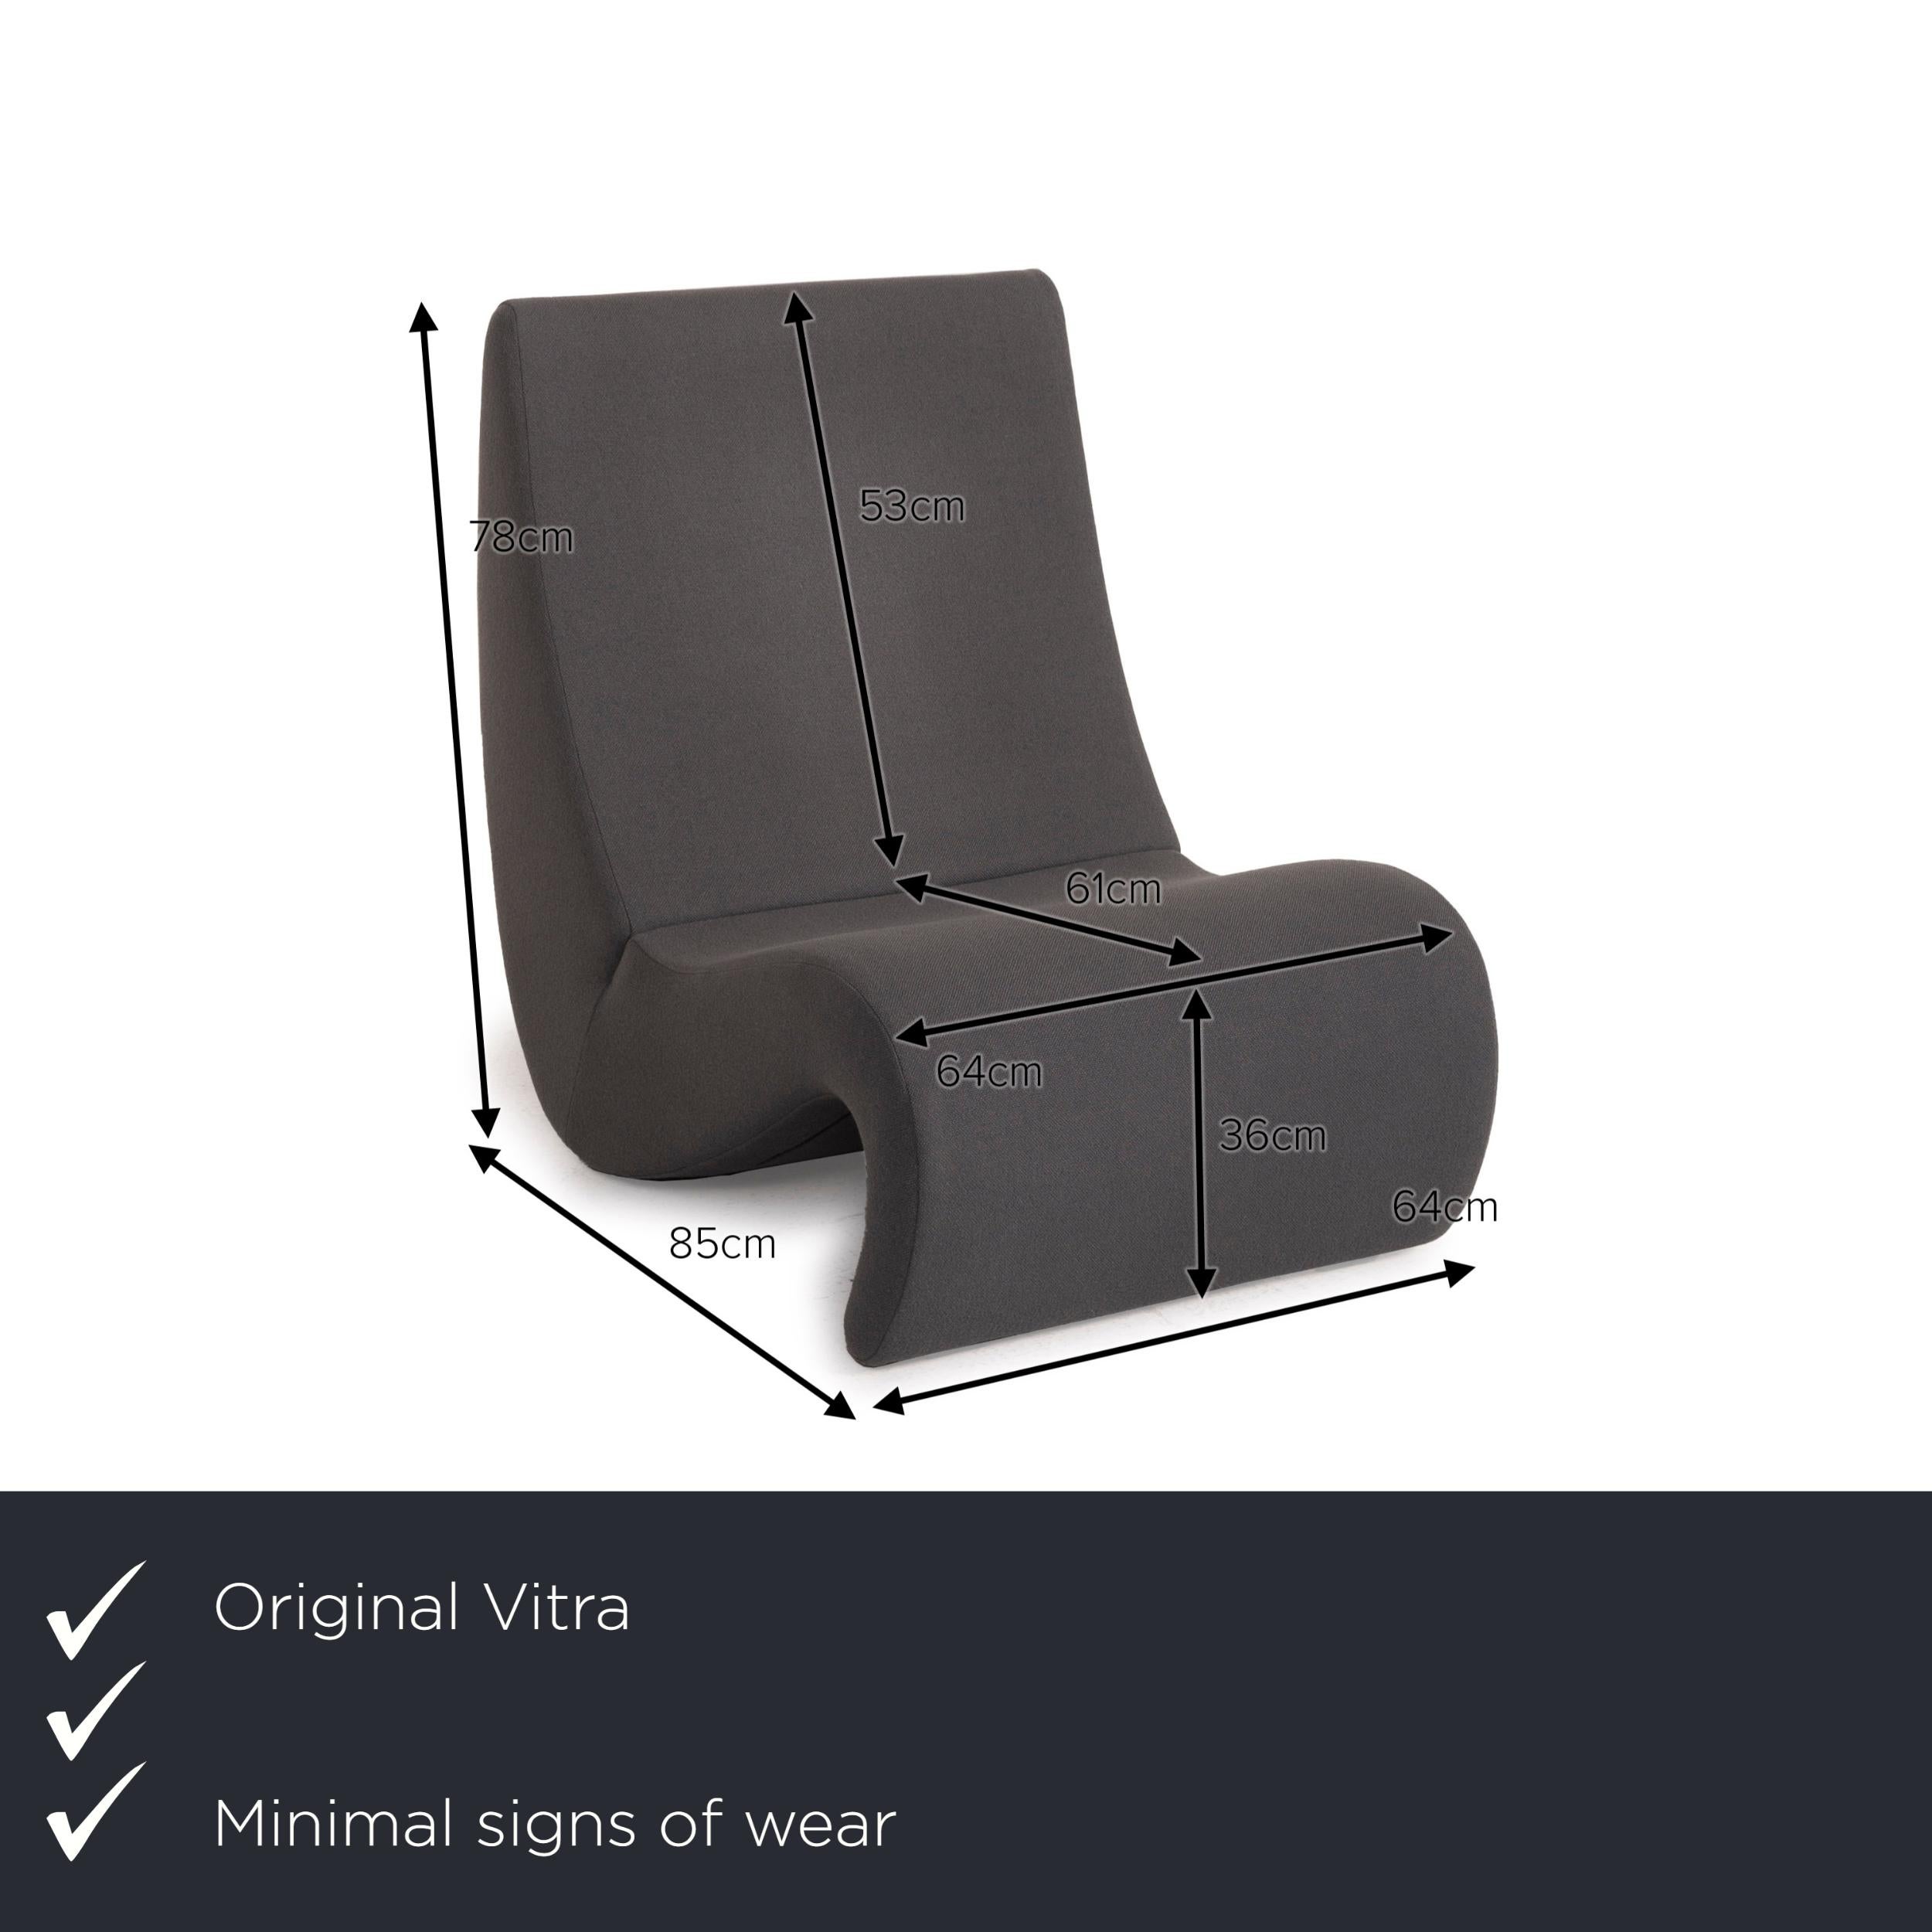 We present to you a Vitra Amoebe fabric armchair gray.
  
 

 Product measurements in centimeters:
 

 depth: 85
 width: 64
 height: 78
 seat height: 36
seat depth: 61
 seat width: 64
 back height: 53.

  